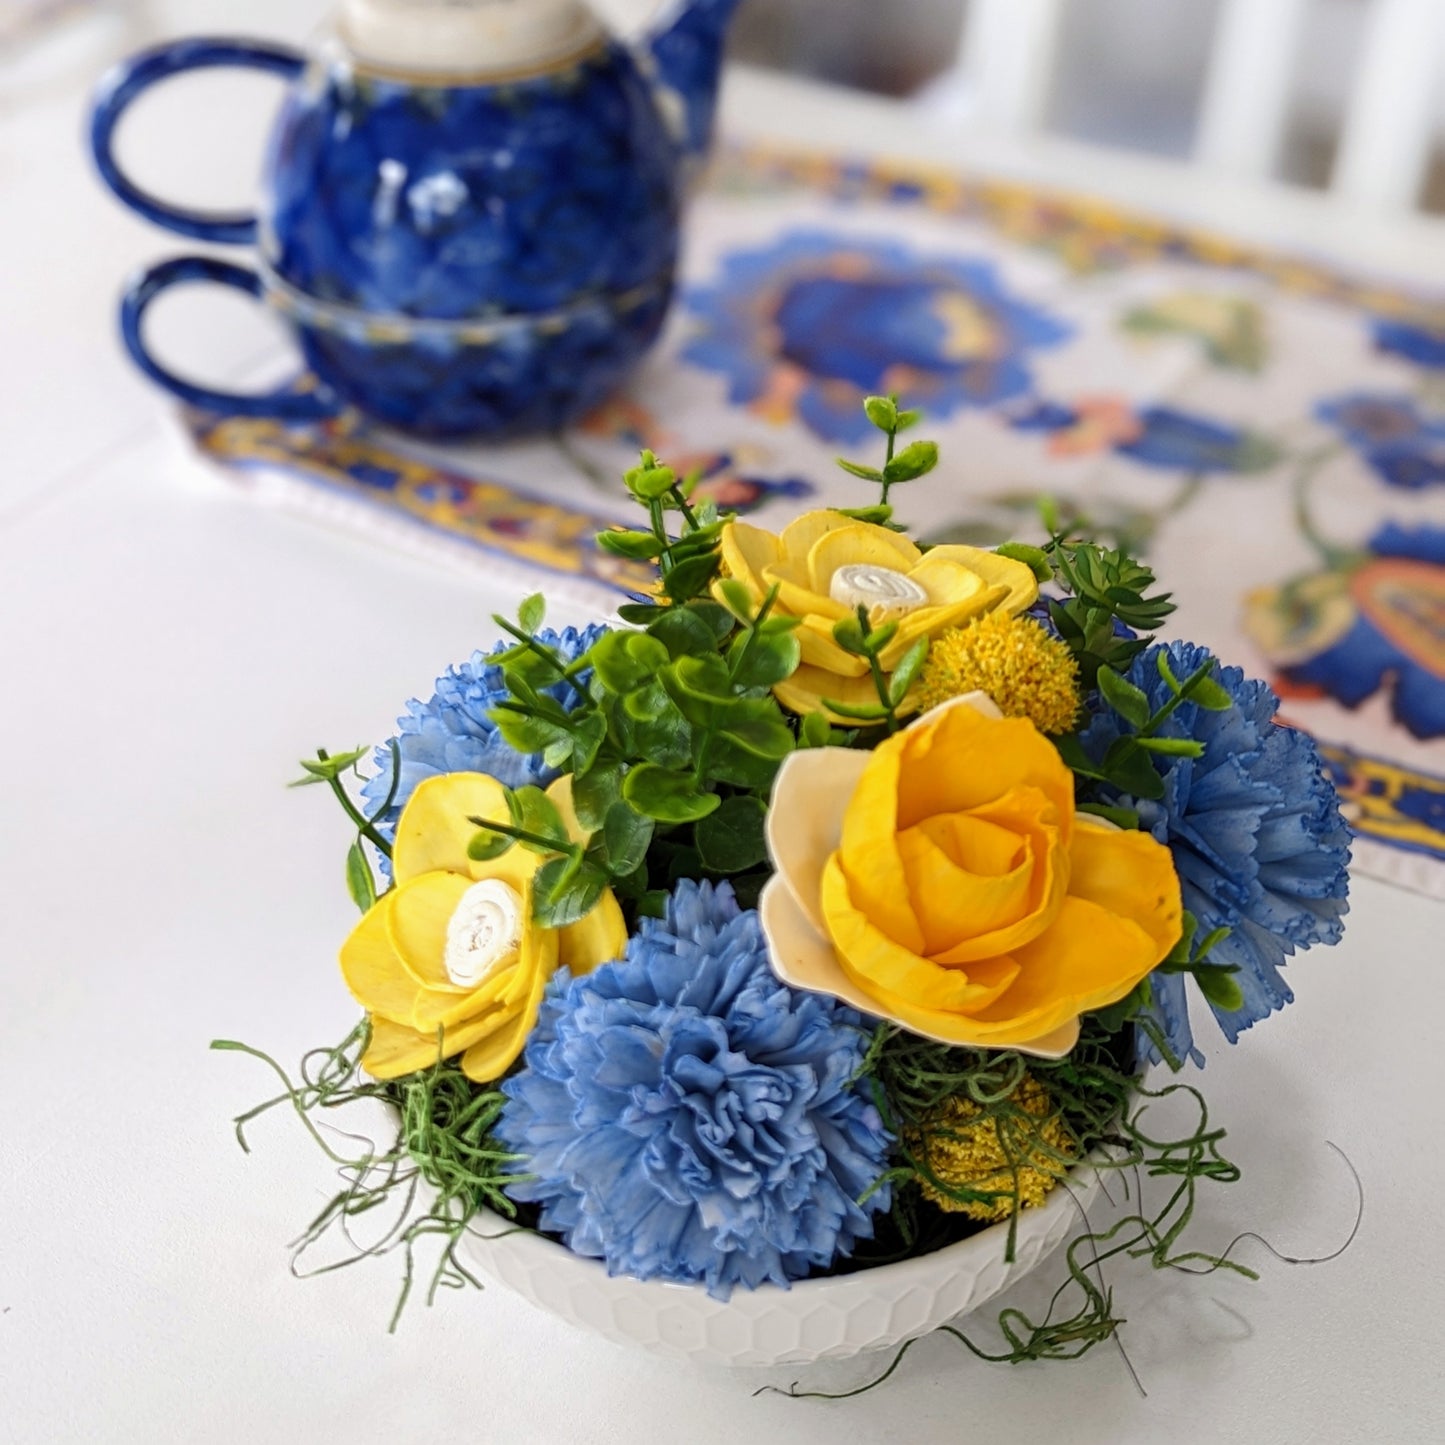 Vibrant Sola Wood Flowers: Blue and Yellow Centrepiece